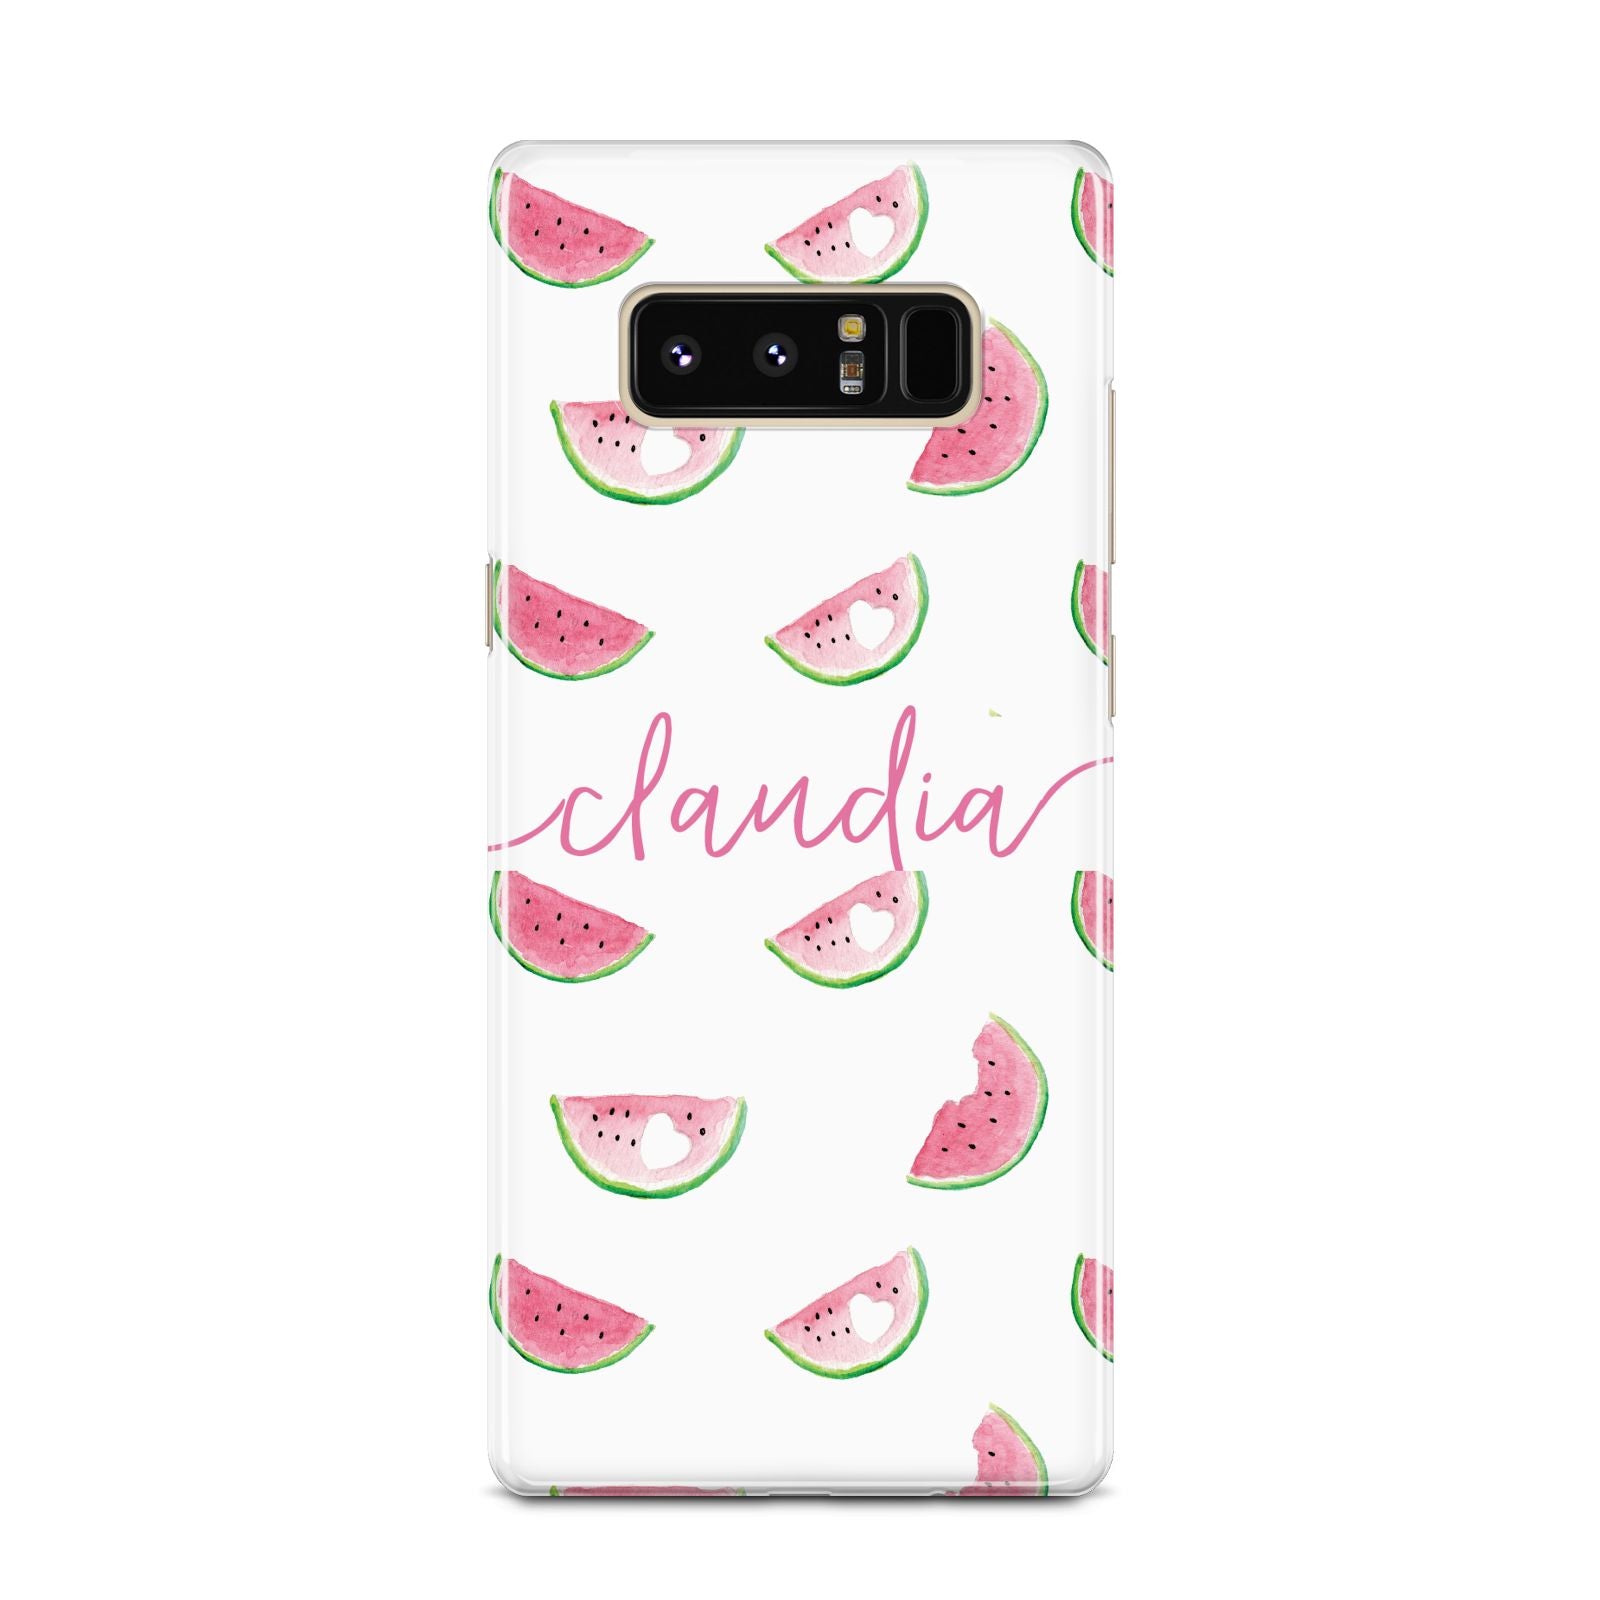 Personalised Transparent Watermelon Samsung Galaxy Note 8 Case